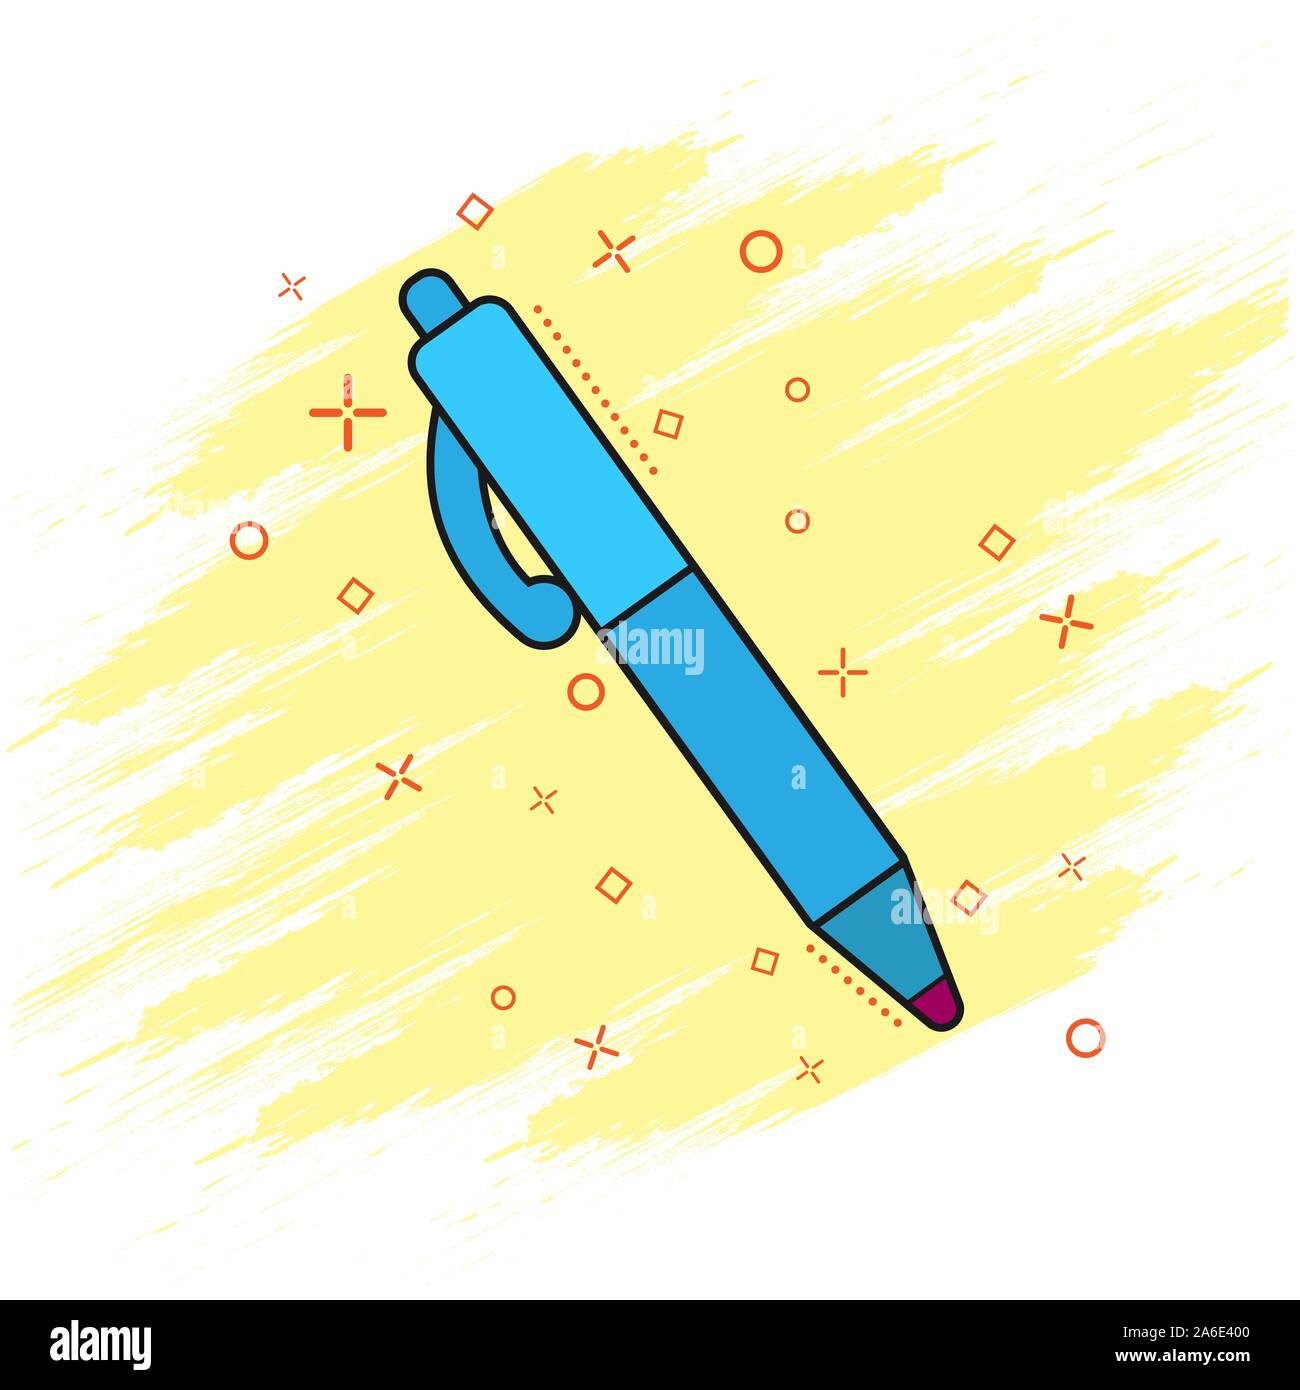 Ballpoint pen doodle vector illustration. Stationery item icon pencil or pen  for writing. Stock Vector